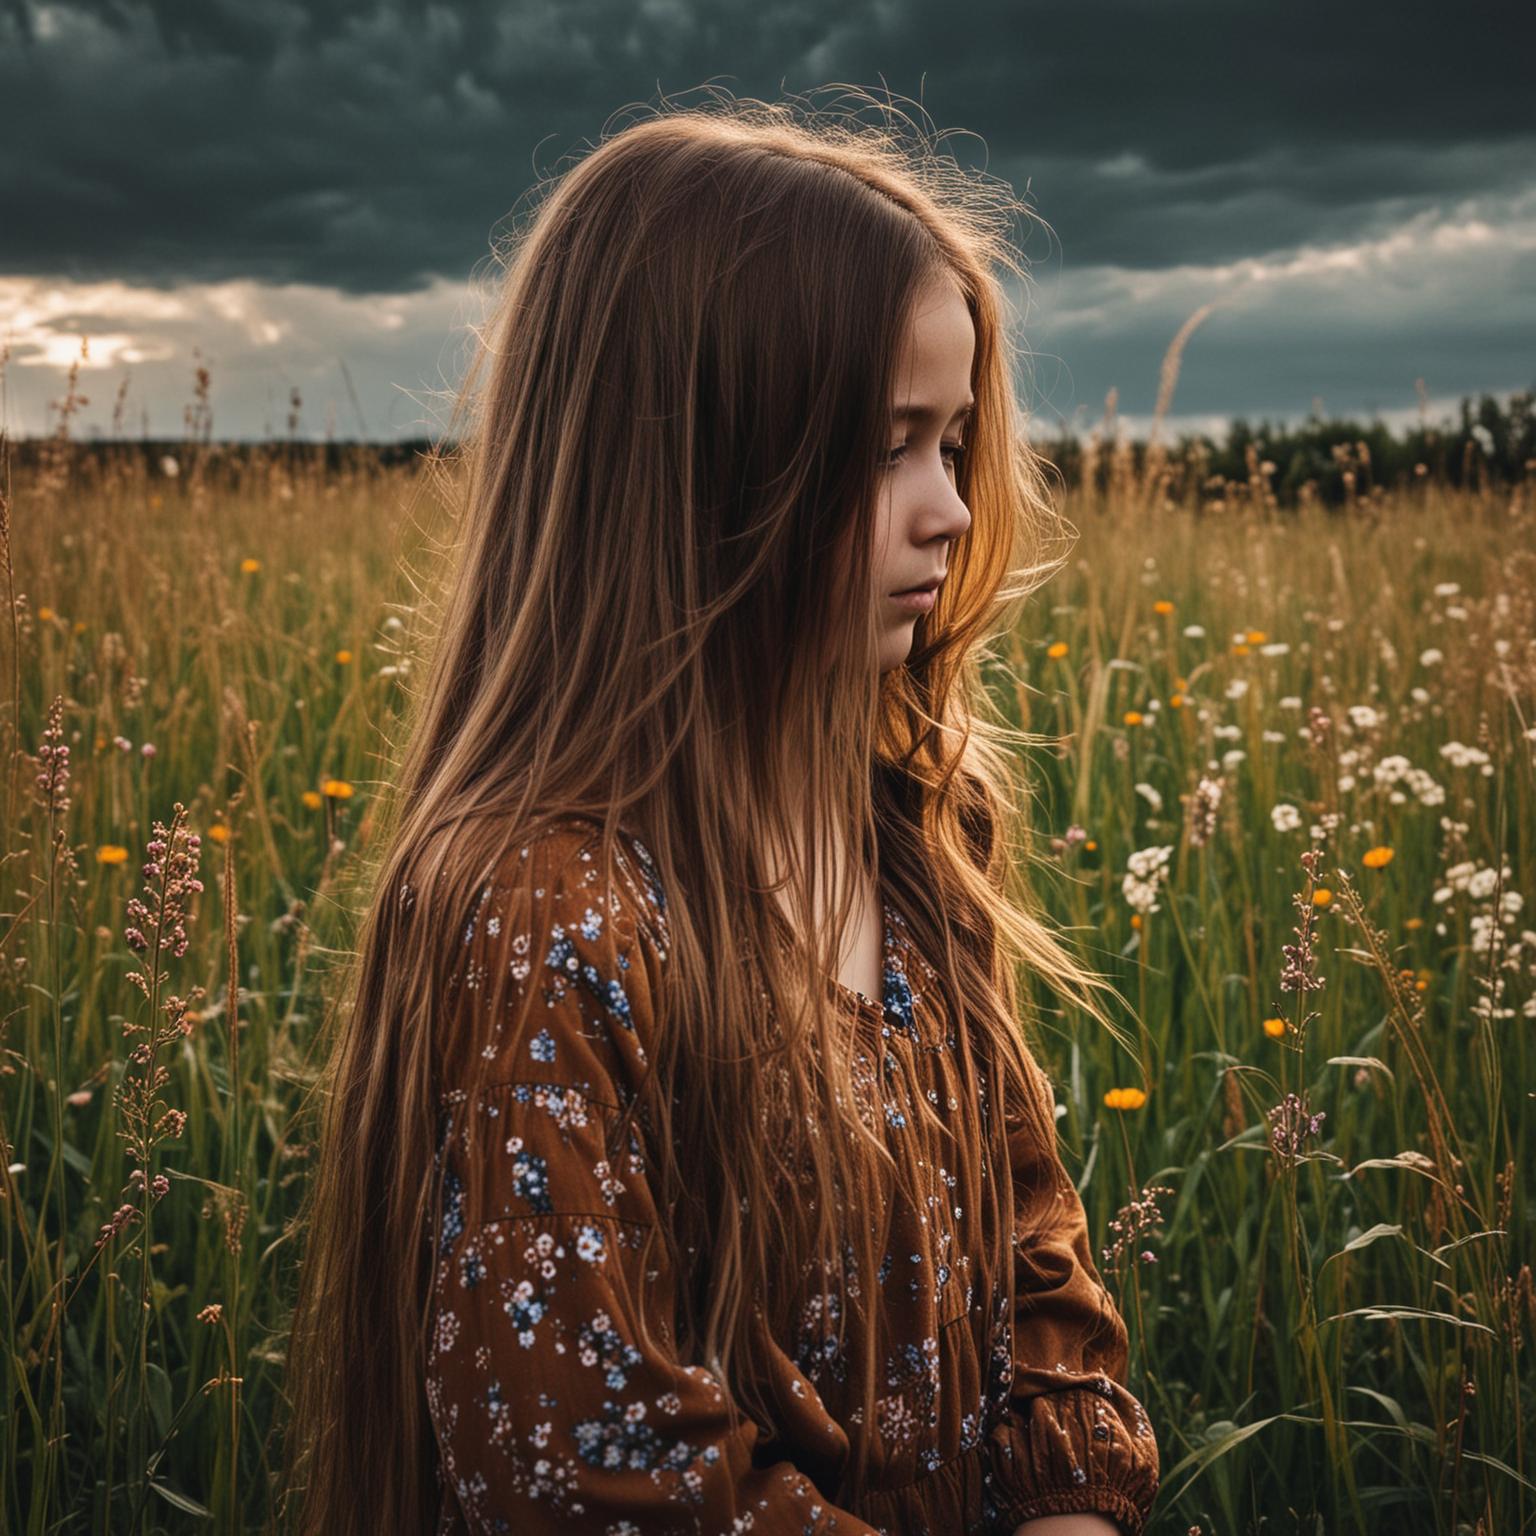 Lonely Child Standing in High Grass Under Stormy Sky